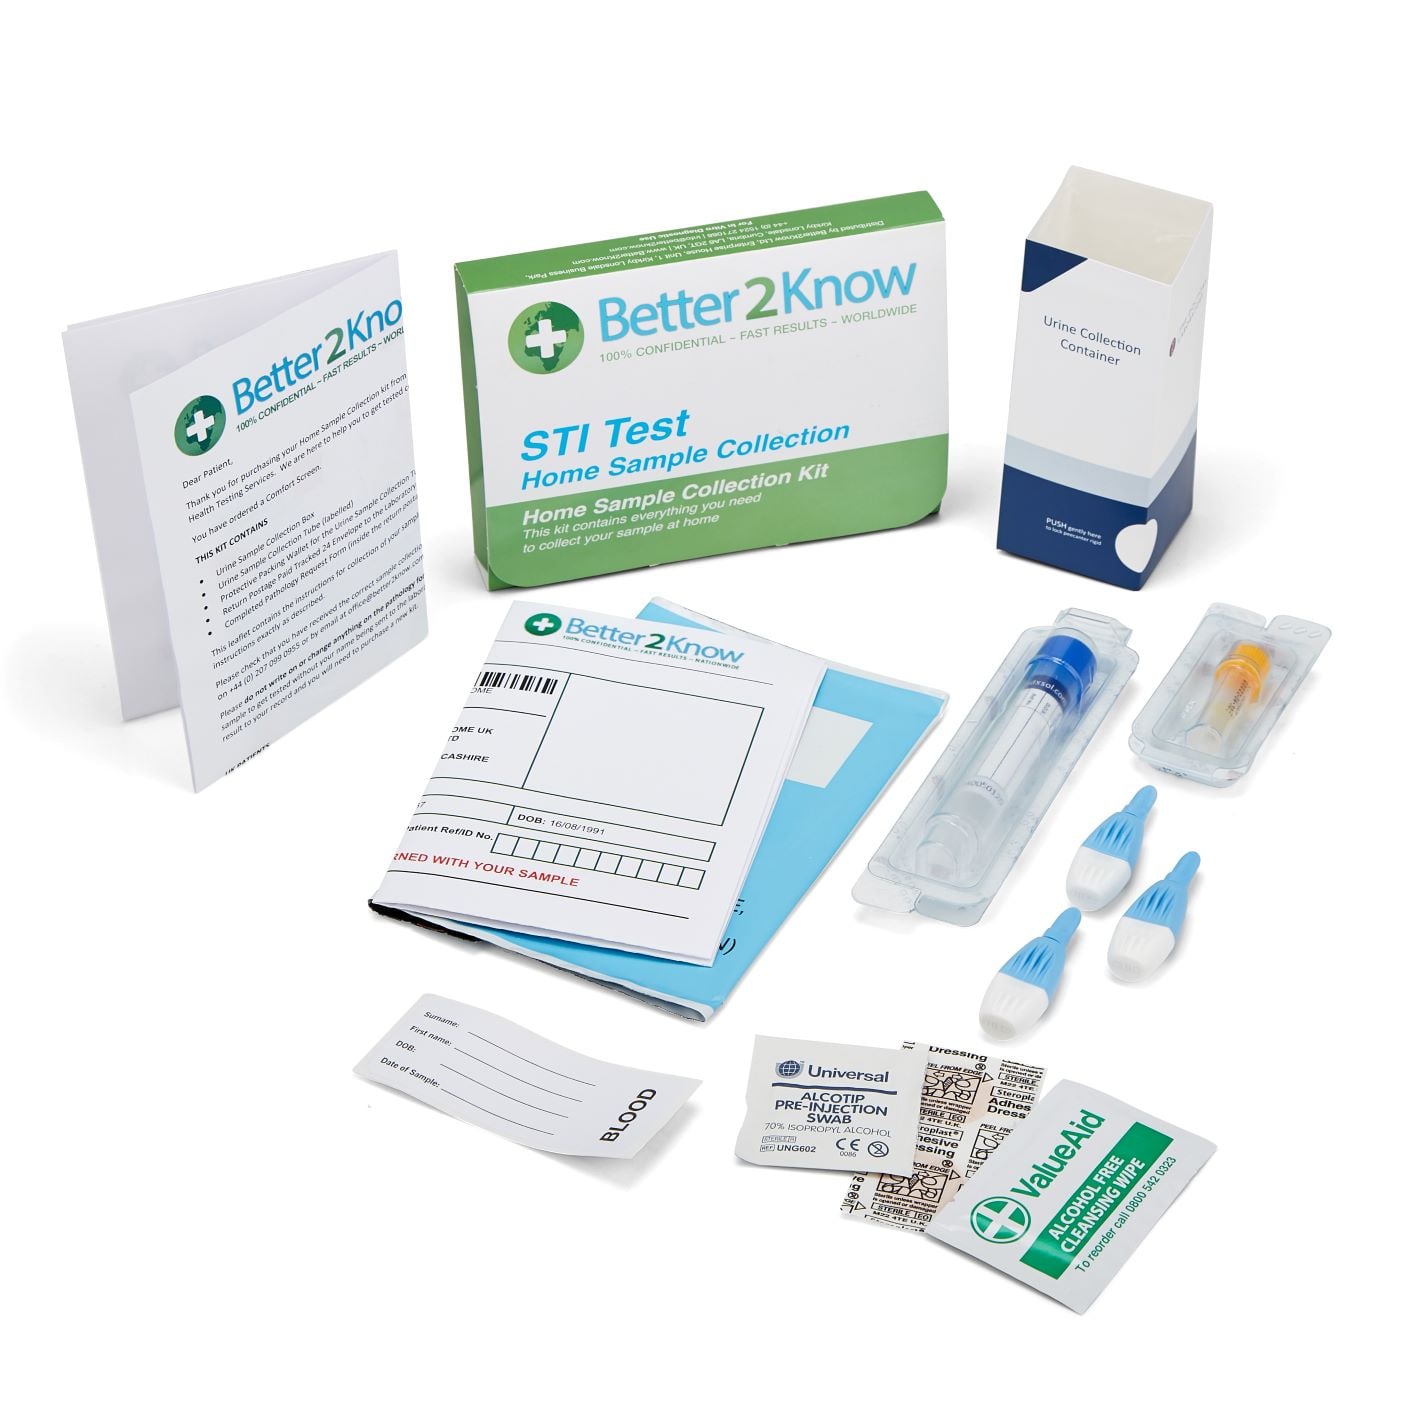 Better2Know&#039;s Wellbeing Screen tests for HIV, Chlamydia and Gonorrhoea.